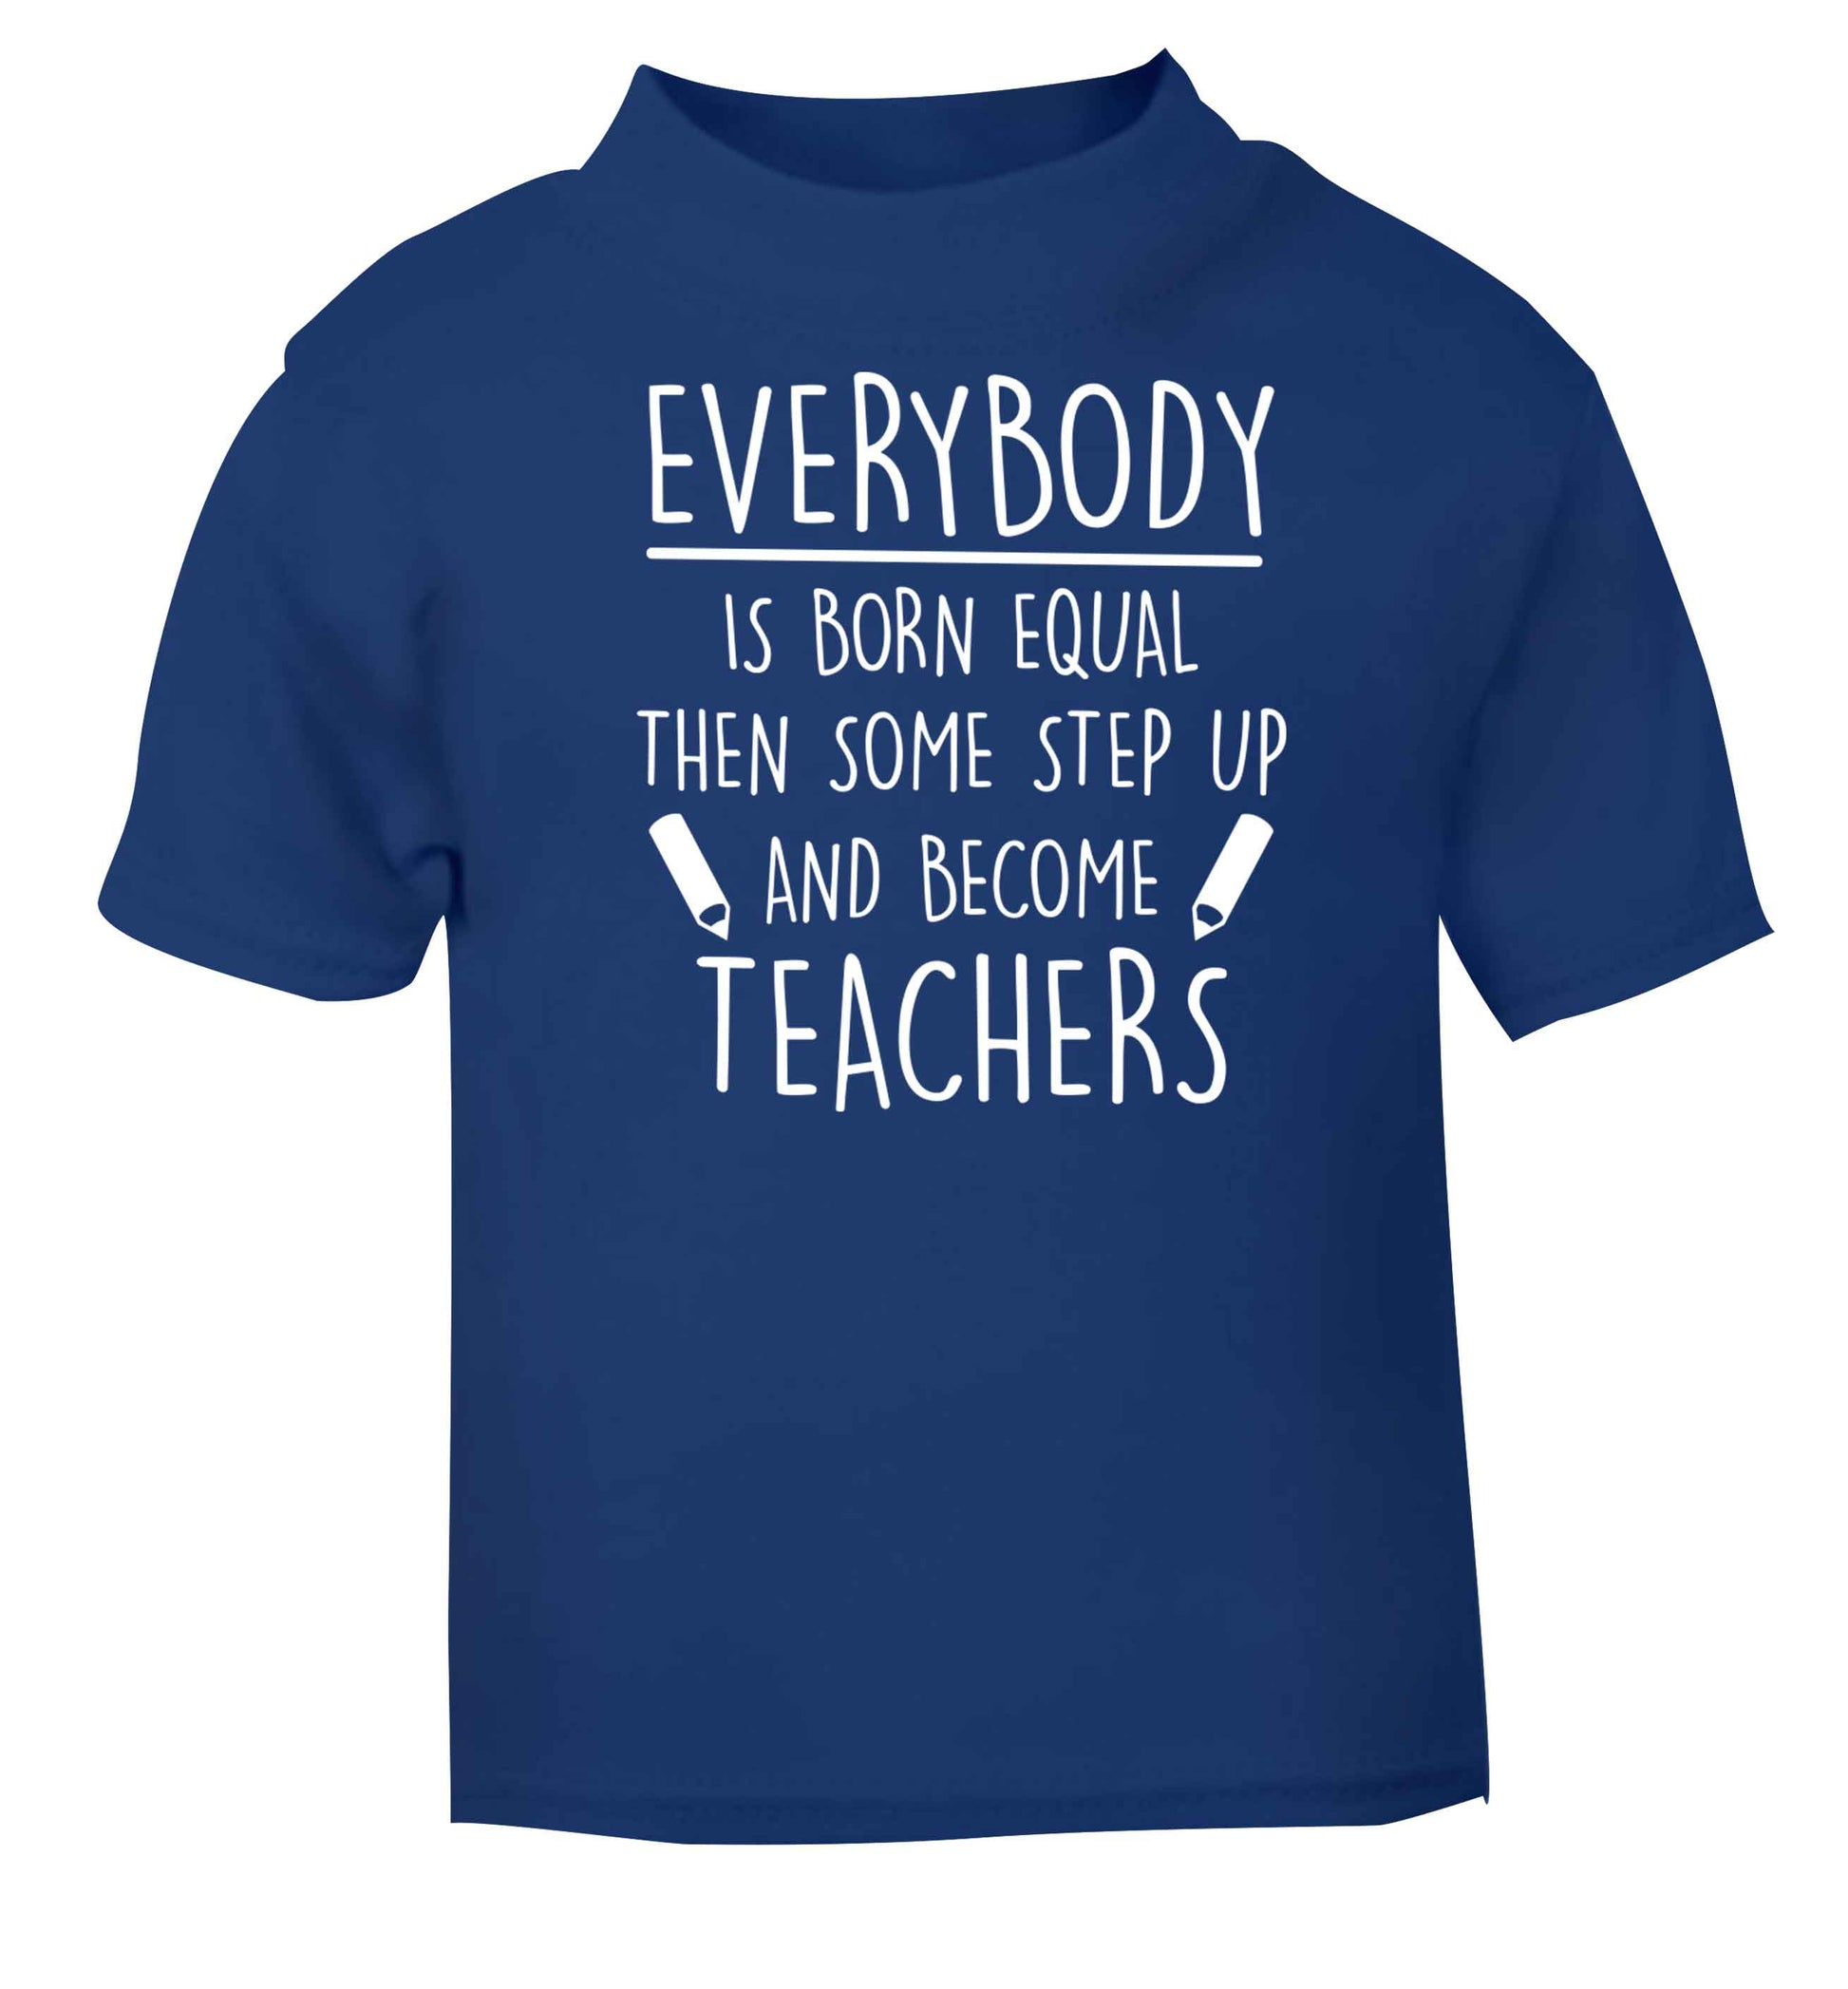 Everybody is born equal then some step up and become teachers blue baby toddler Tshirt 2 Years